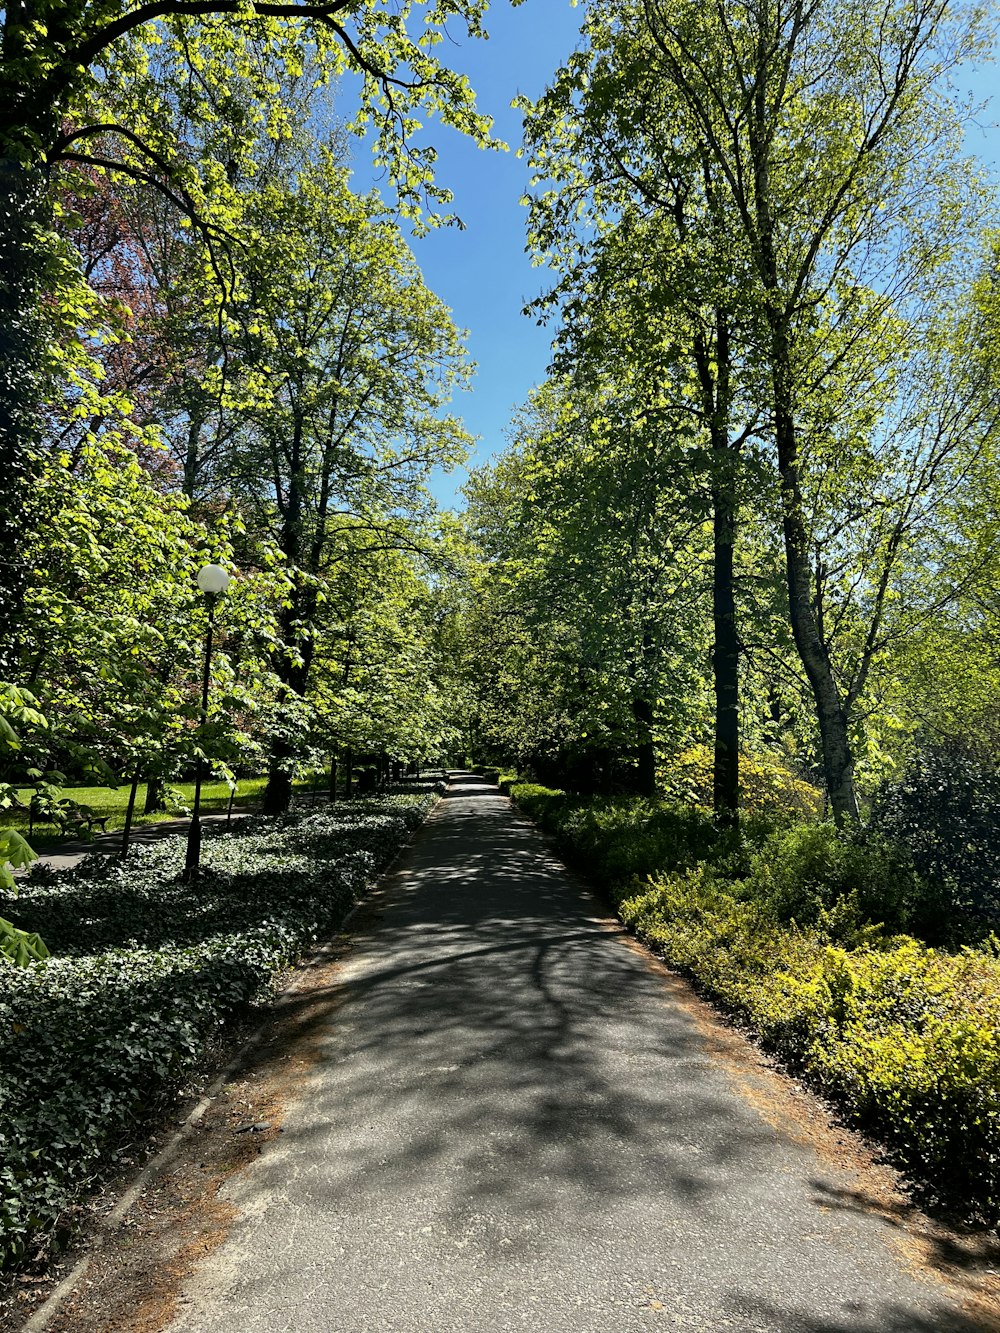 a paved road surrounded by trees and bushes